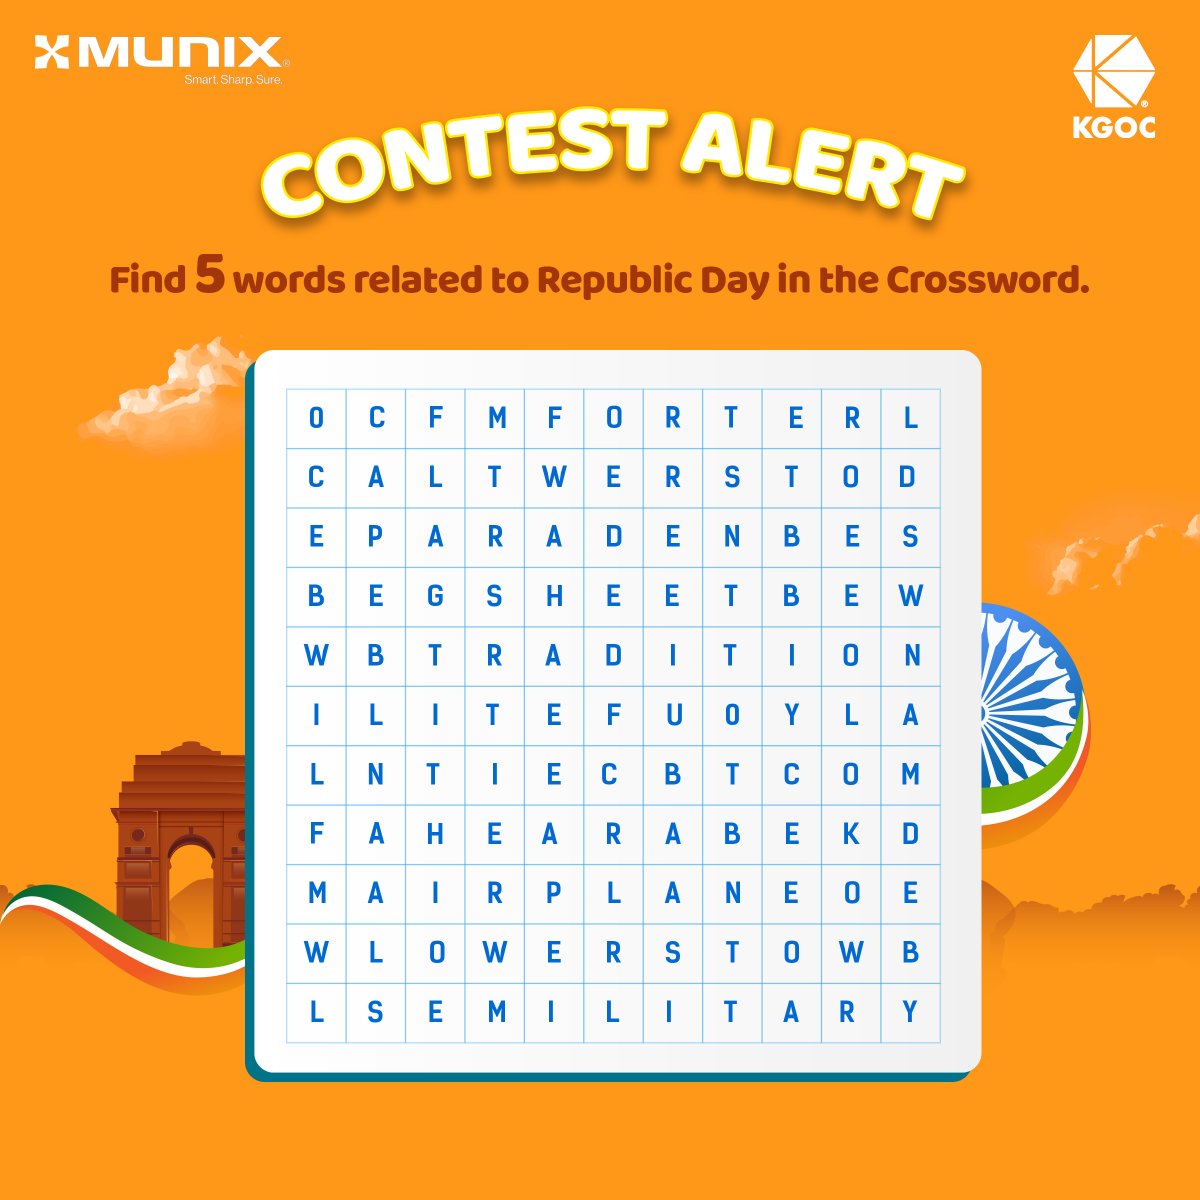 #ContestAlert Ready for a twist of words? Dive into our Republic Day crossword challenge! Can you spot 5 words related to Republic Day? Let the fun begin! #Munix #ContestAlert #Contest #Contest2024 #RepublicDayContest #ContestIndia #MunixContest